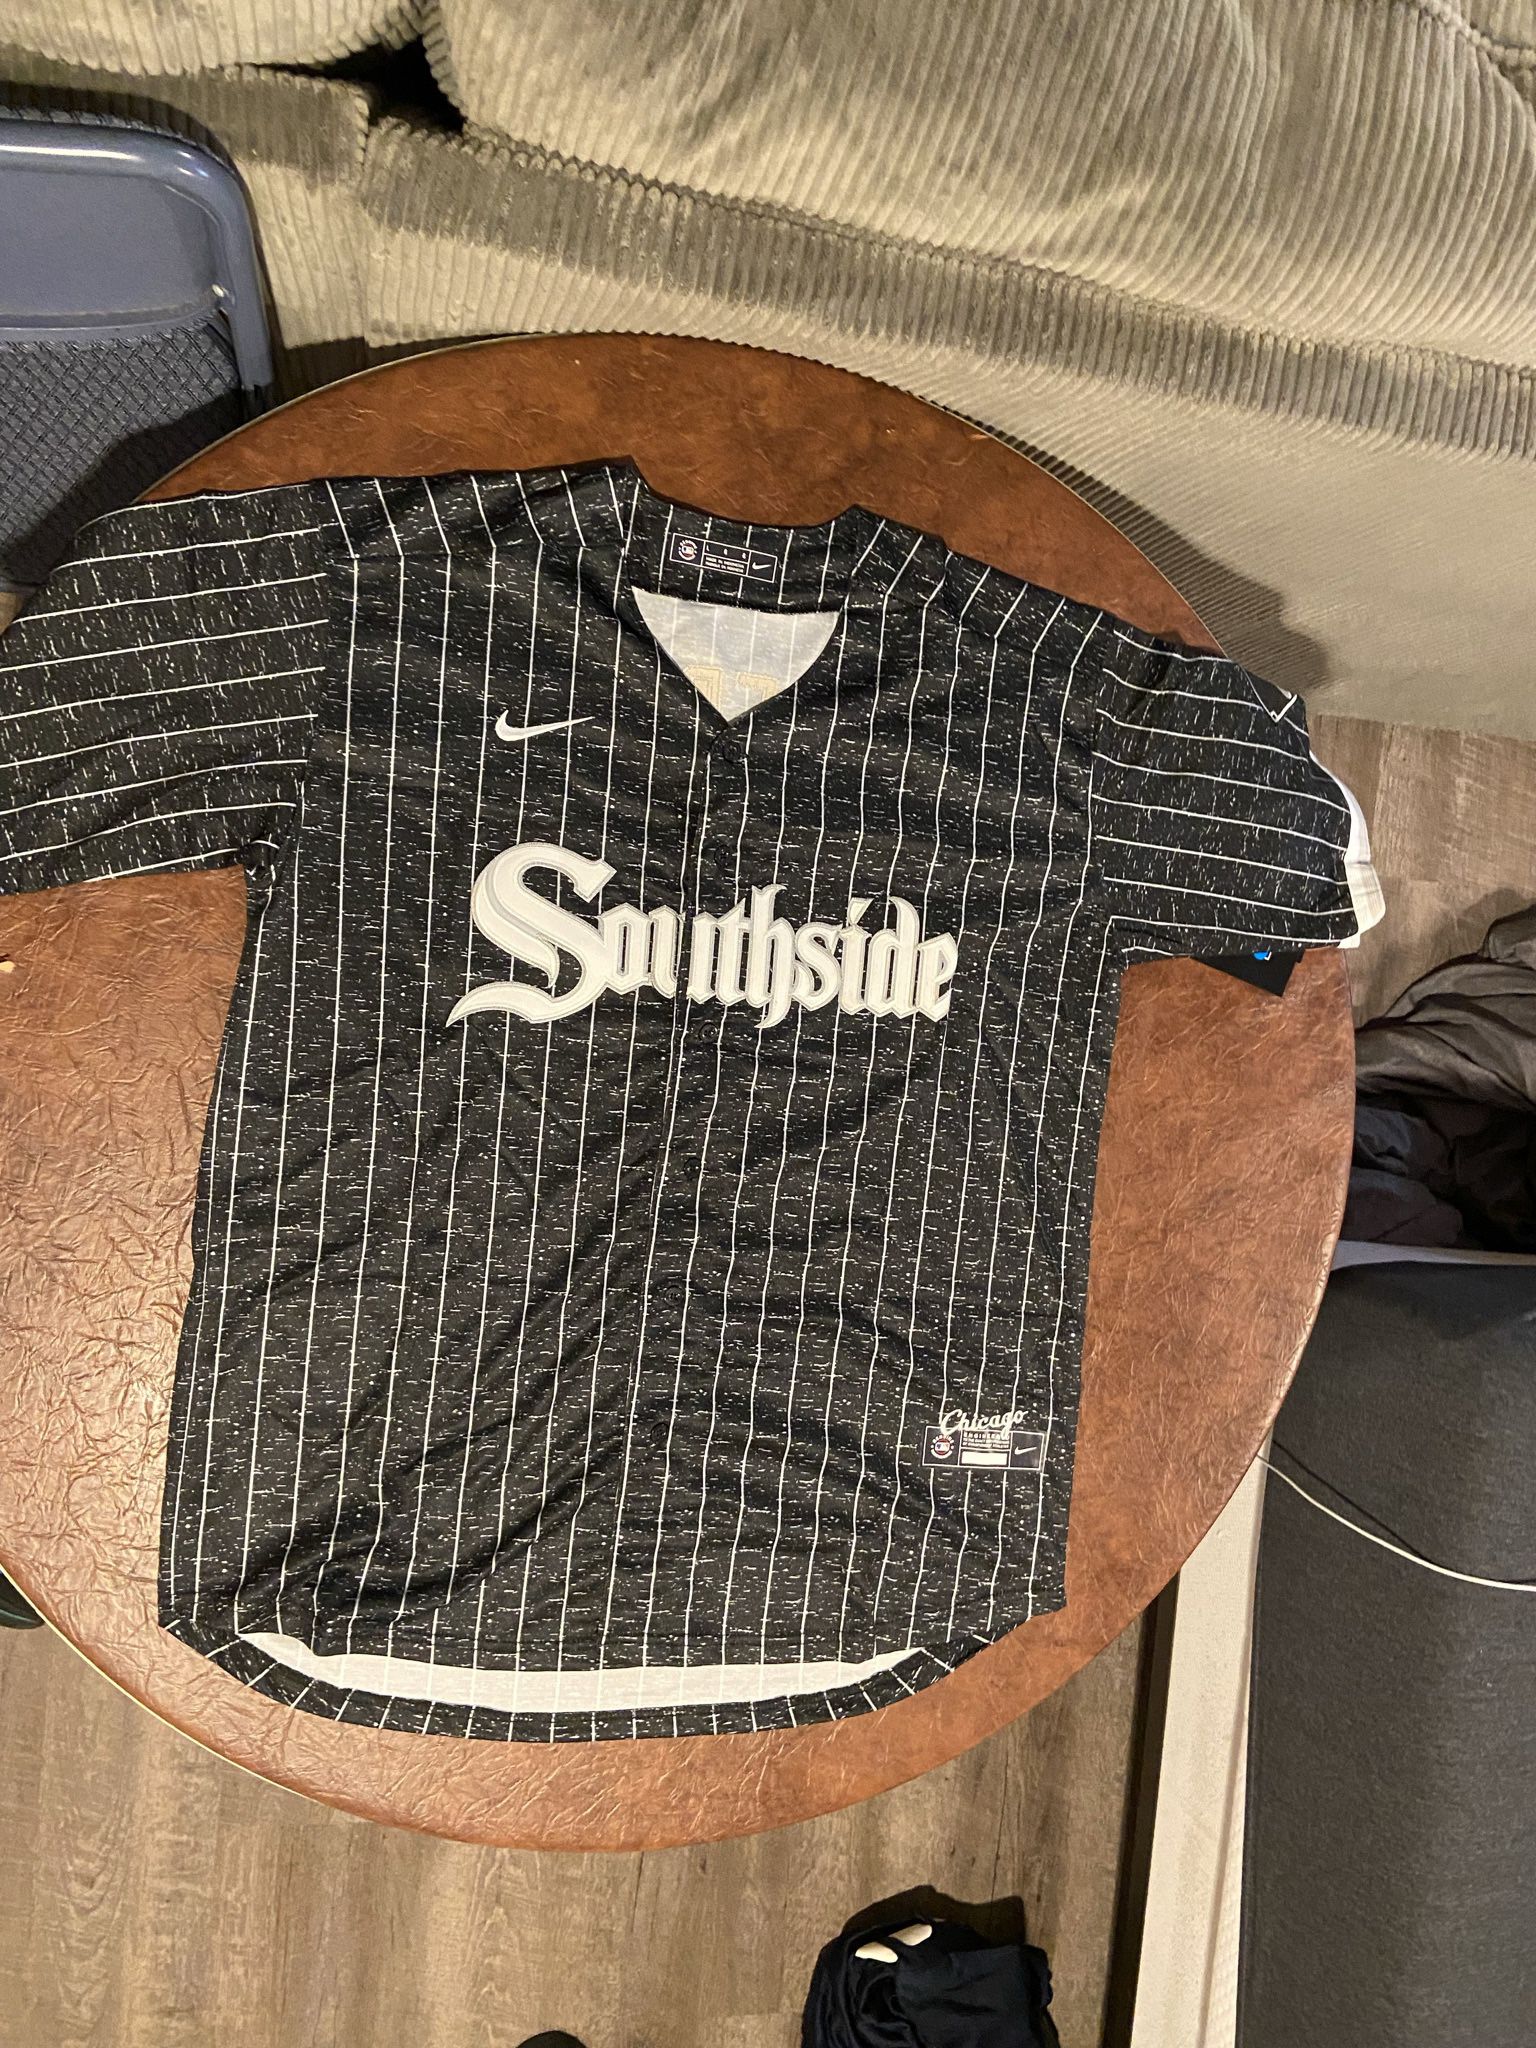 chicago white sox southside jerseys